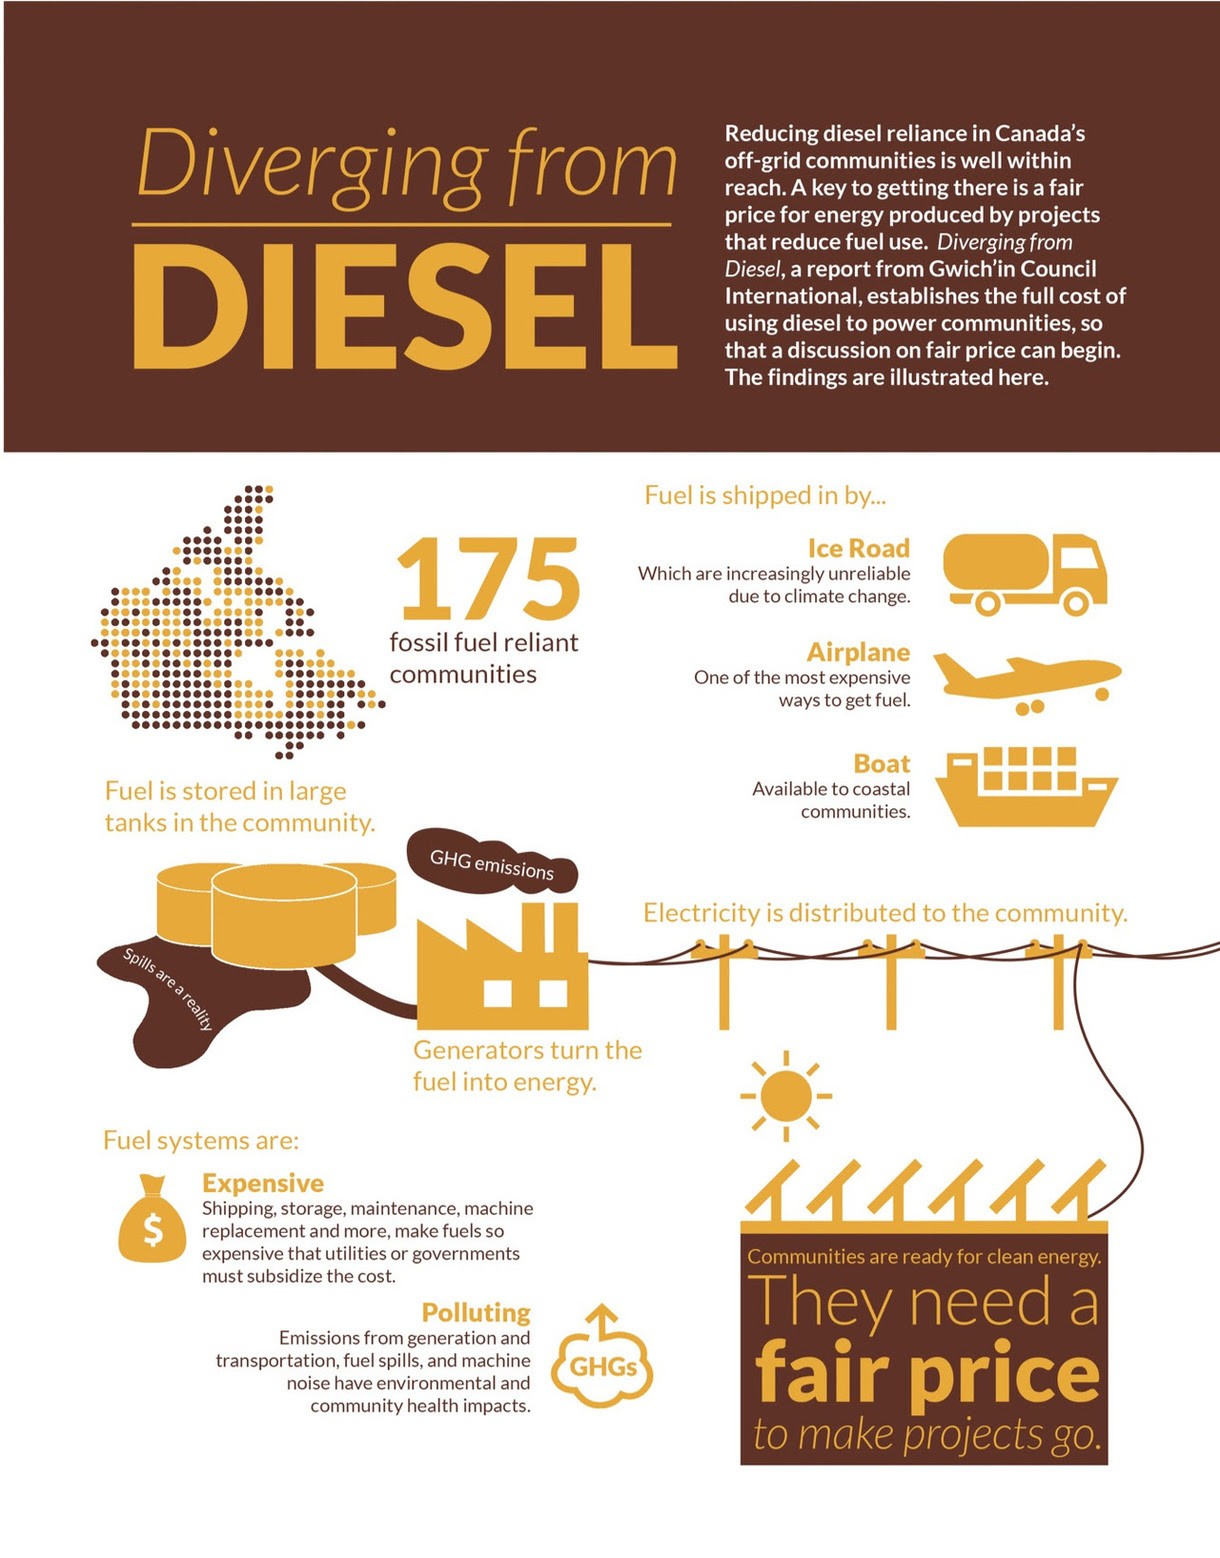 Canadian Report Details the True Cost of Diesel Power Generation in Remote Communities